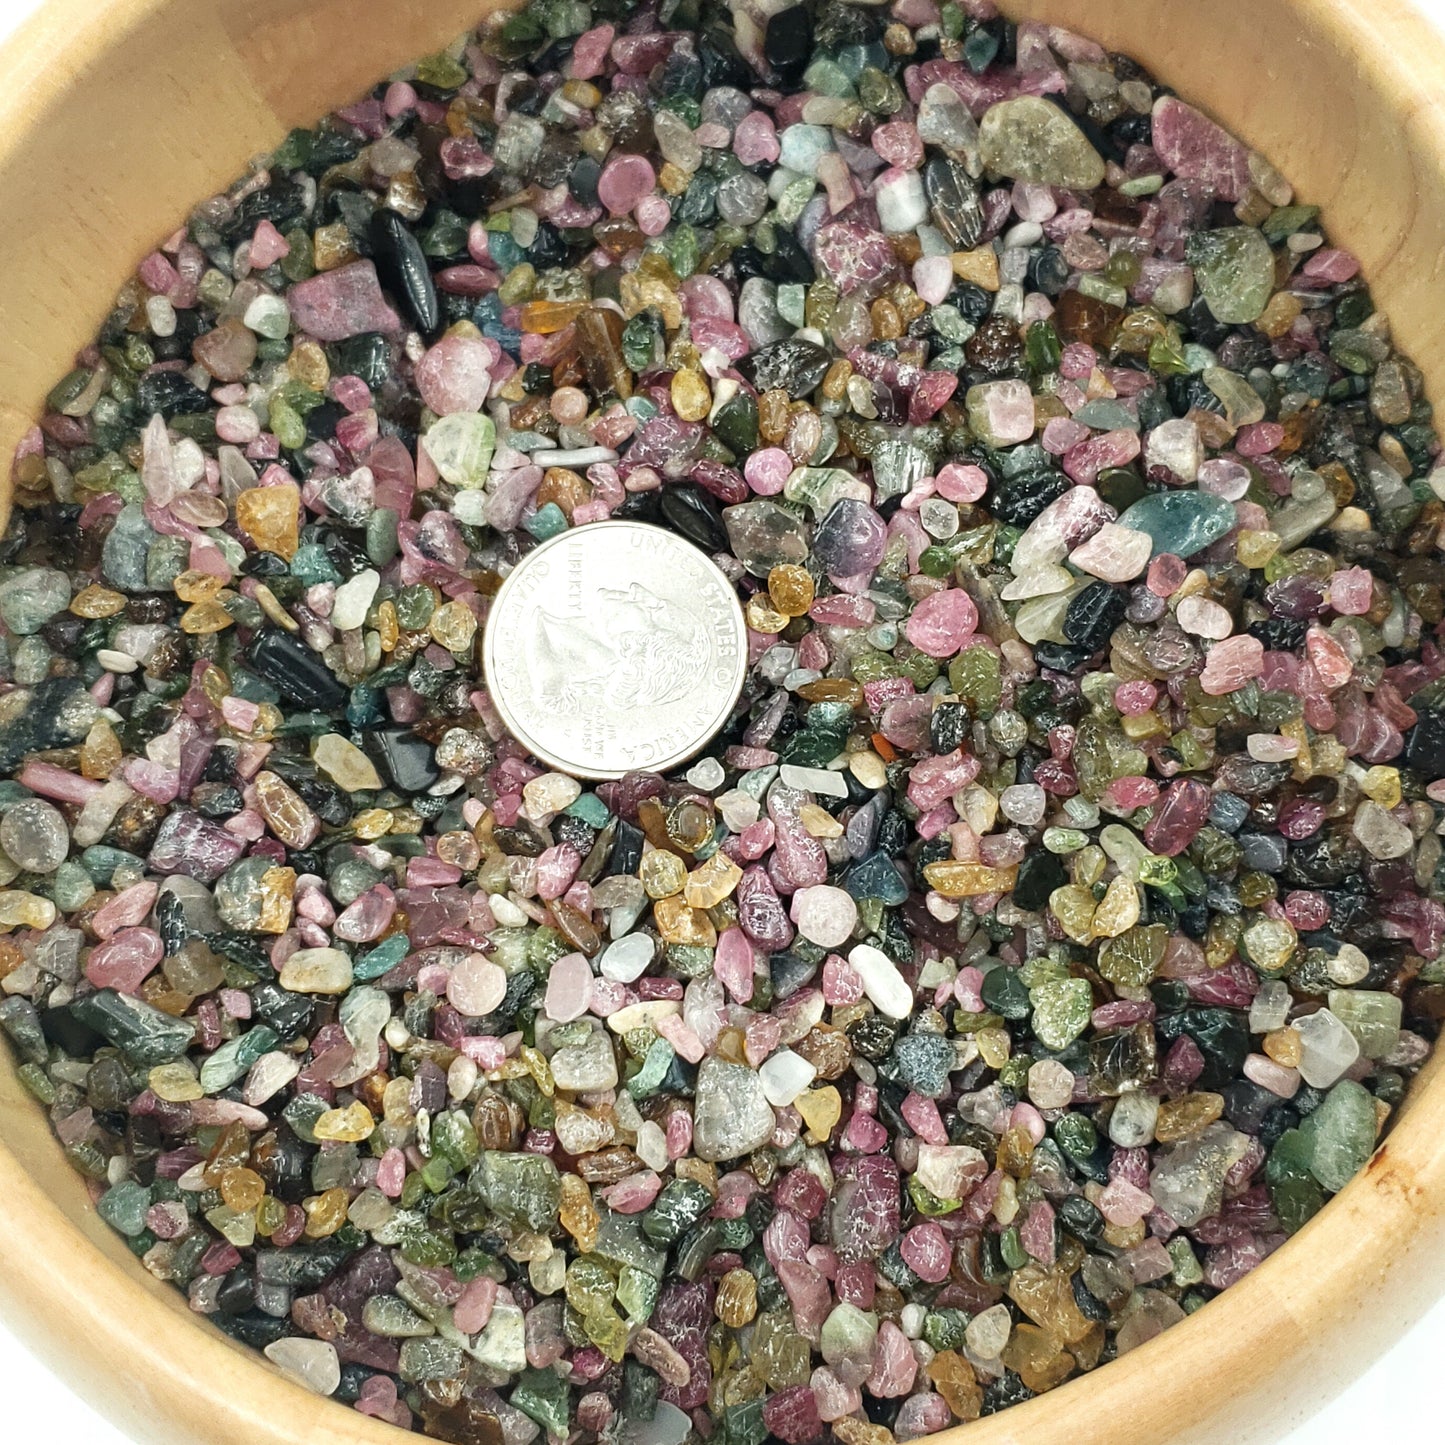 Watermelon Tourmaline Chips - Elevated Metaphysical